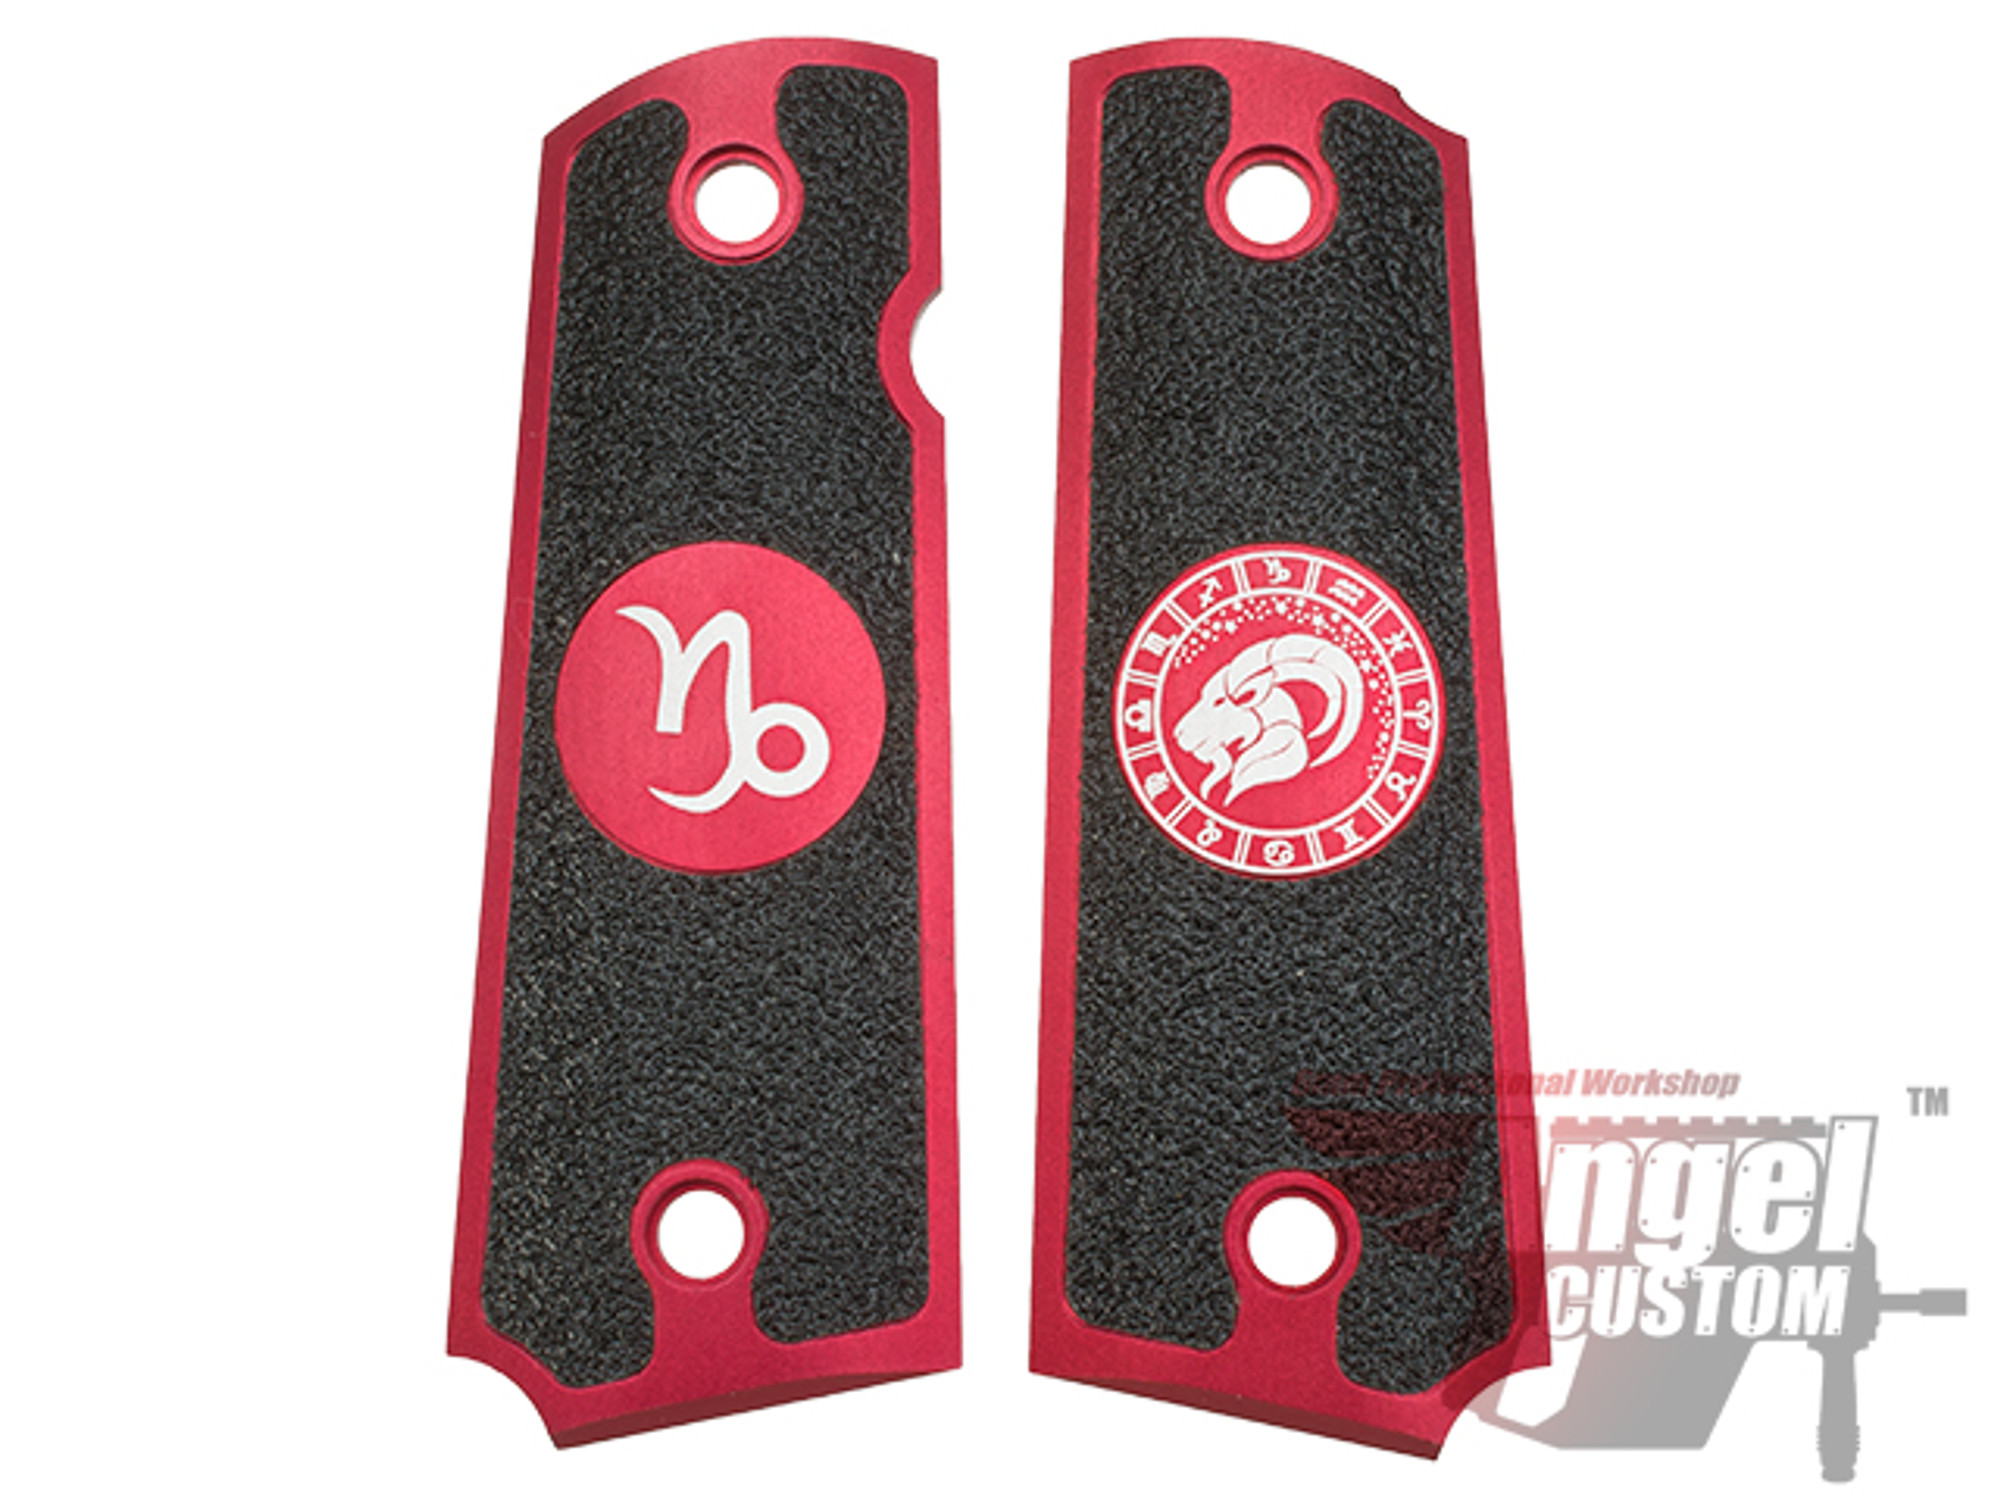 Angel Custom CNC Machined Tac-Glove "Zodiac" Grips for WE-Tech 1911 Series Airsoft Pistols - Red (Sign: Capricorn)